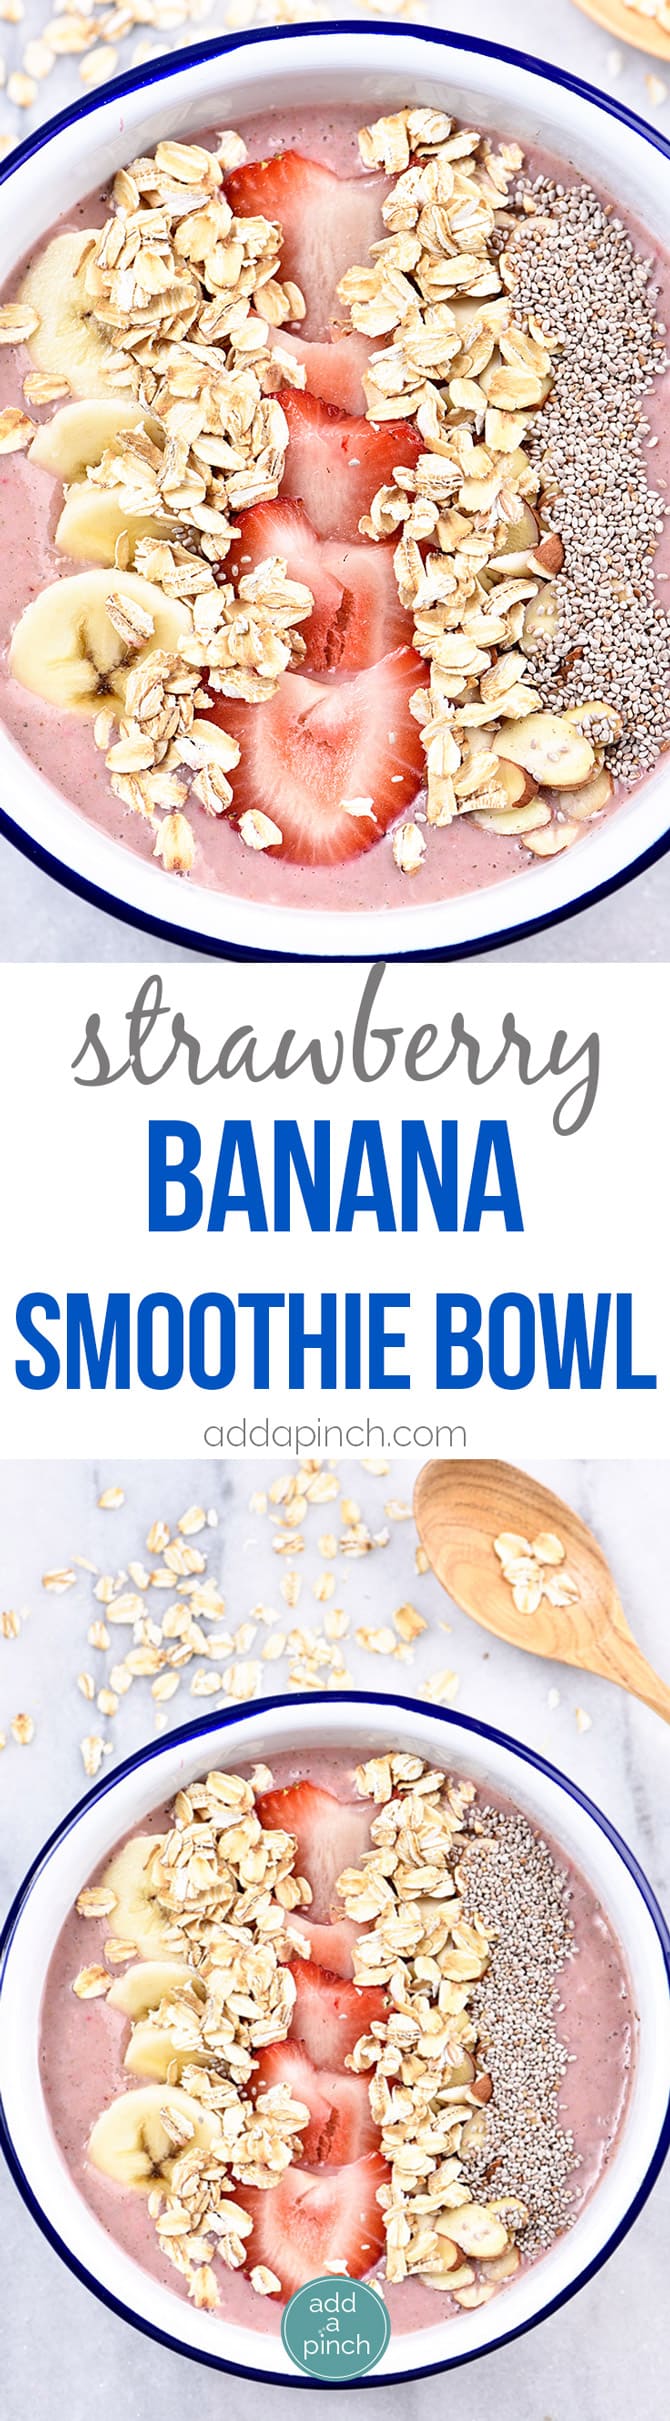 Strawberry Banana Smoothie Bowl Recipe - This strawberry banana smoothie bowl makes a flavorful and delicious fruit, nut, and oat smoothie bowl! Great for breakfast or an afternoon treat! // addapinch.com